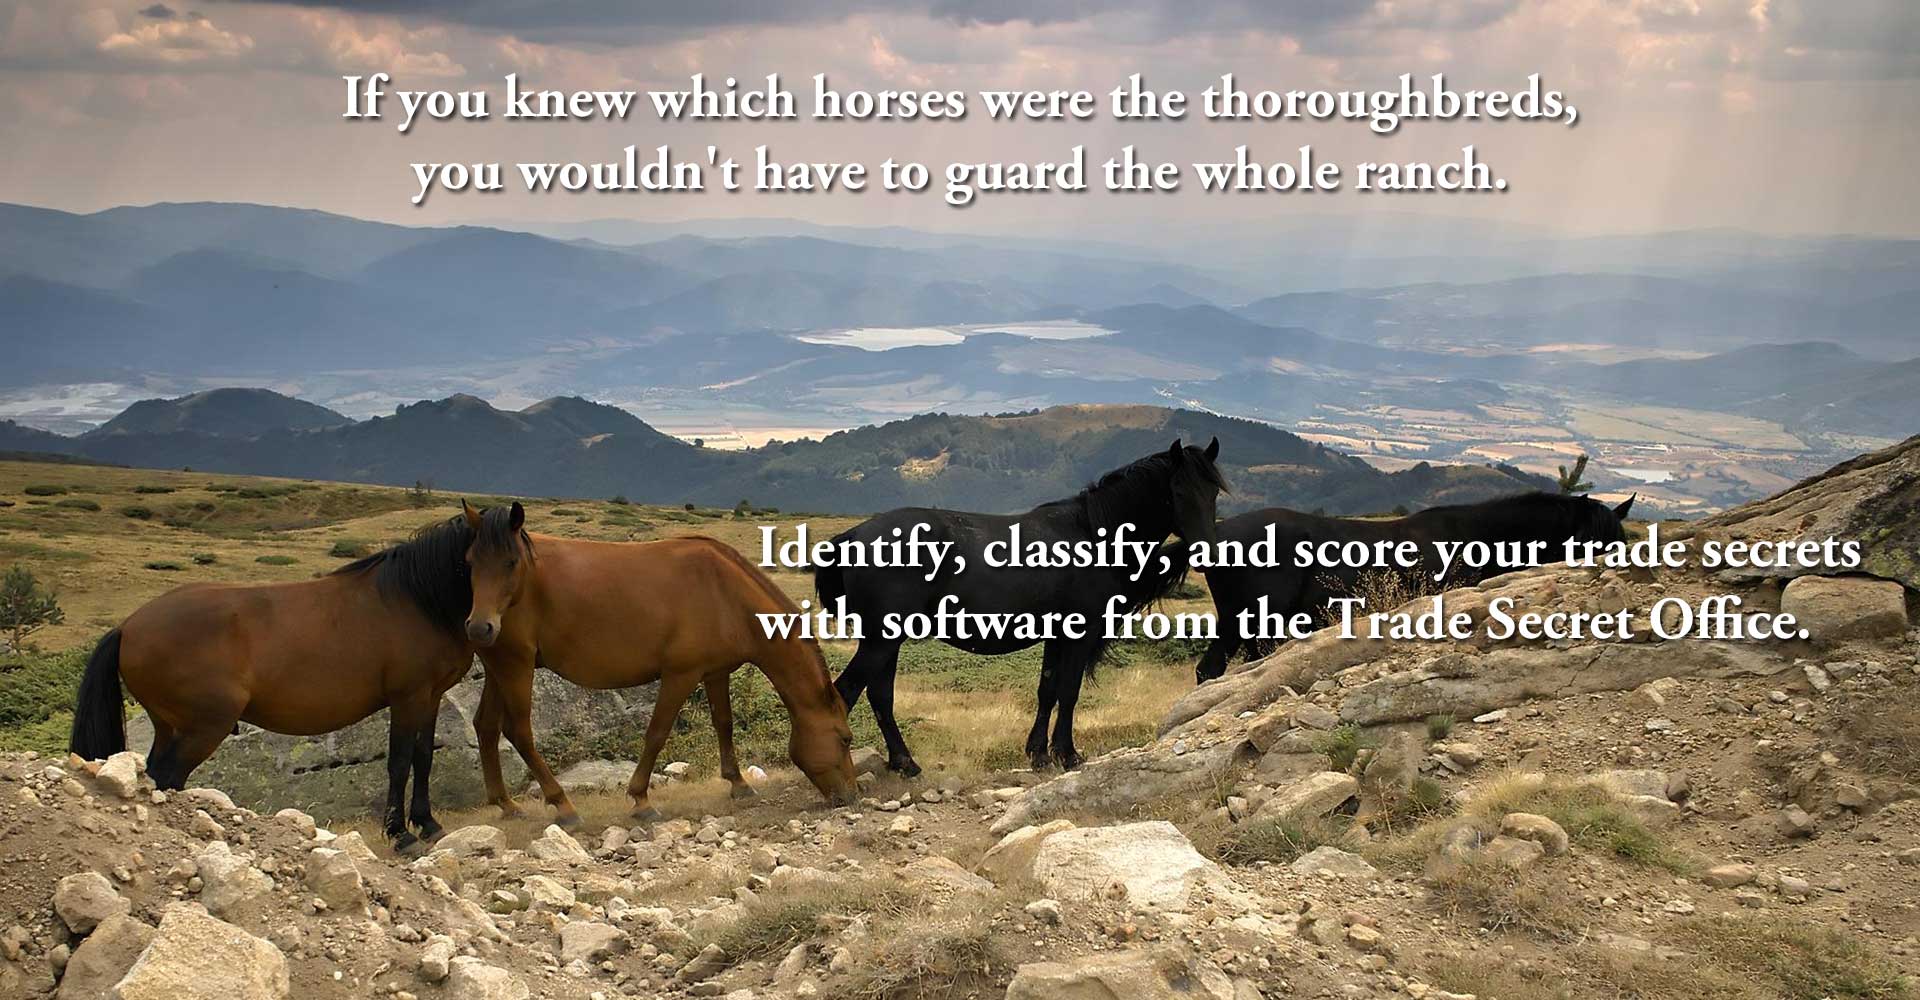 If you knew which horses were the thoroughbreds, you wouldn't have to guard the whole ranch.